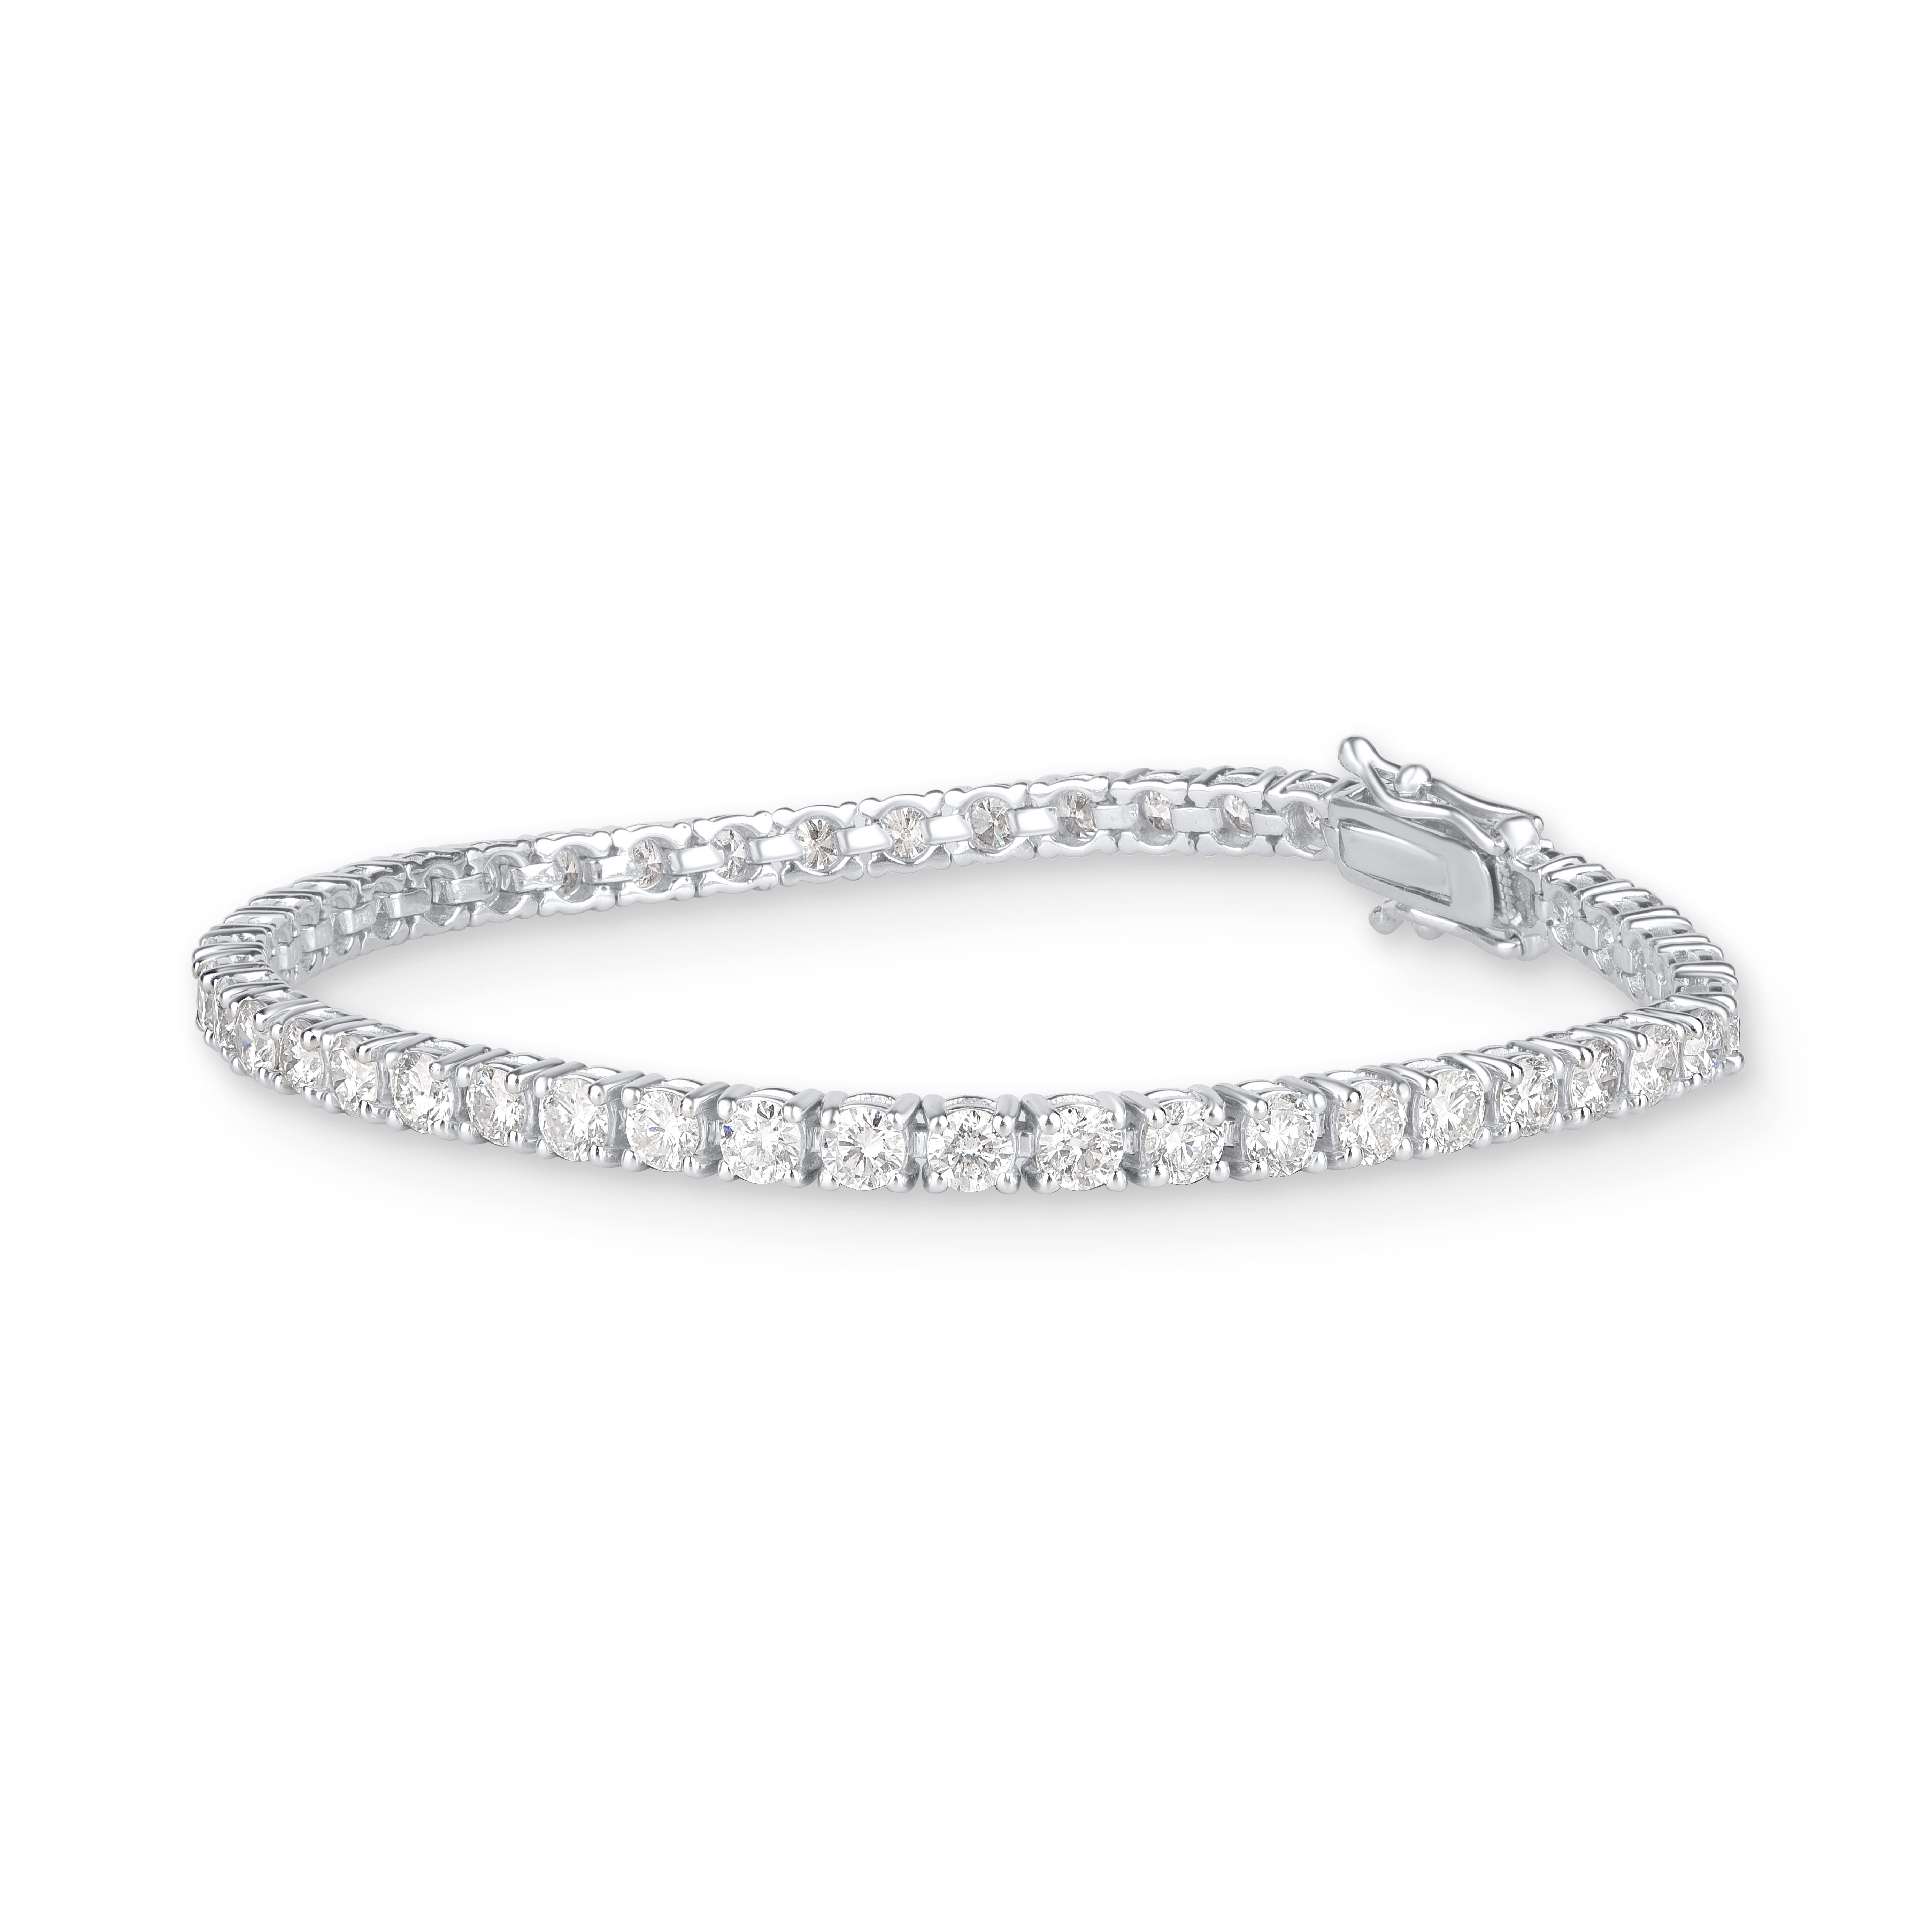 Illuminate her wrist with this ravish look of this gleaming diamond tennis bracelet. This bracelet is crafted by our experts in 18 Karat White Gold and embedded with 46 natural brilliant diamond set in prong setting. The total weight of diamond is